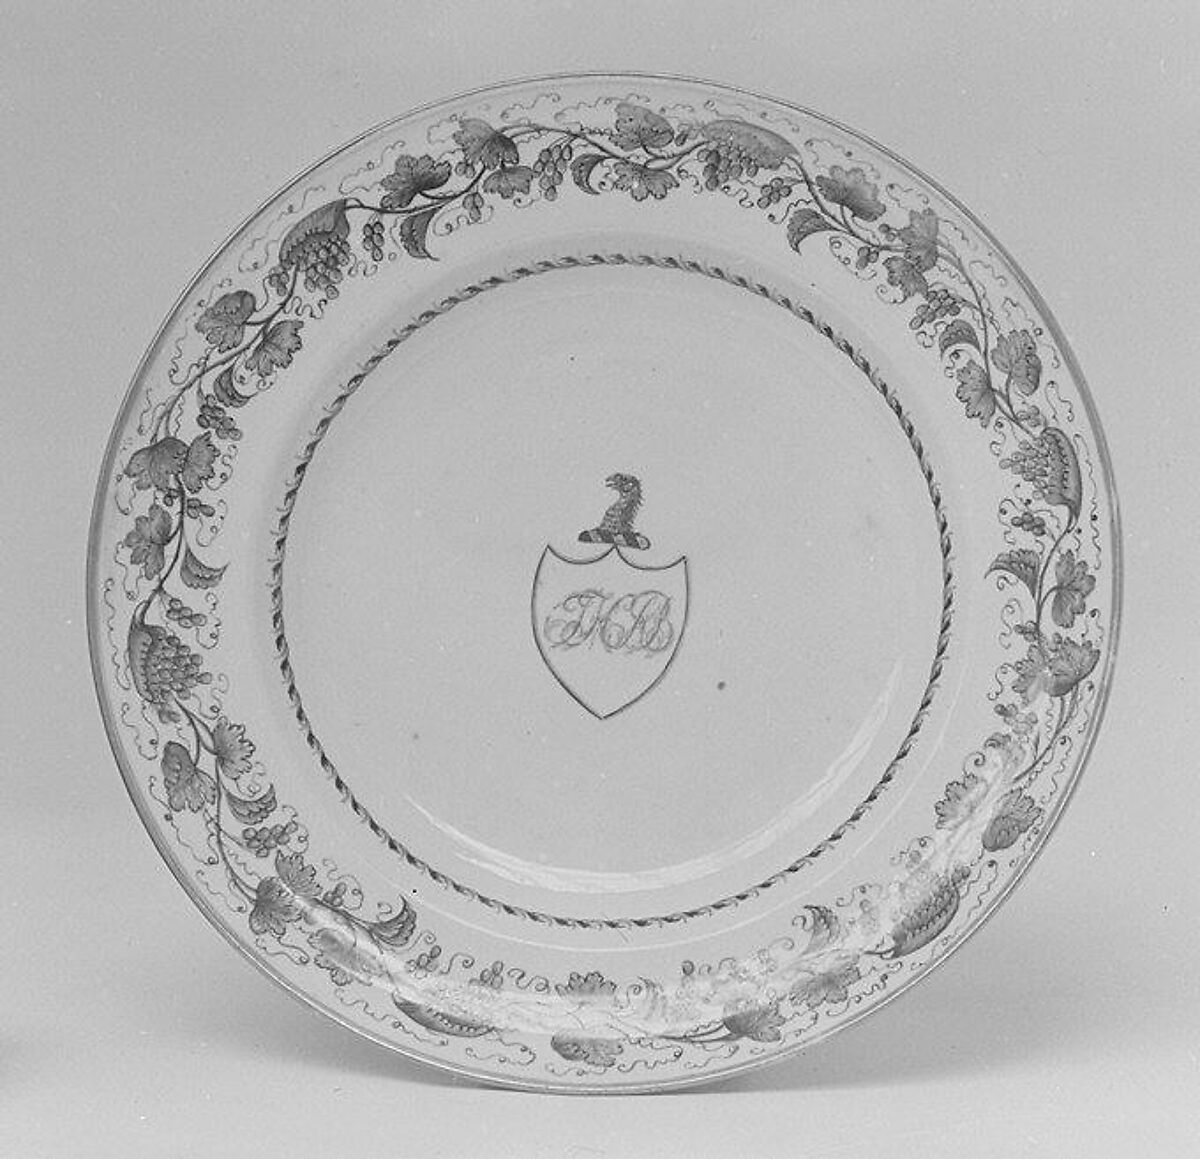 Soup dish (part of a service), Hard-paste porcelain, Chinese, for British market 